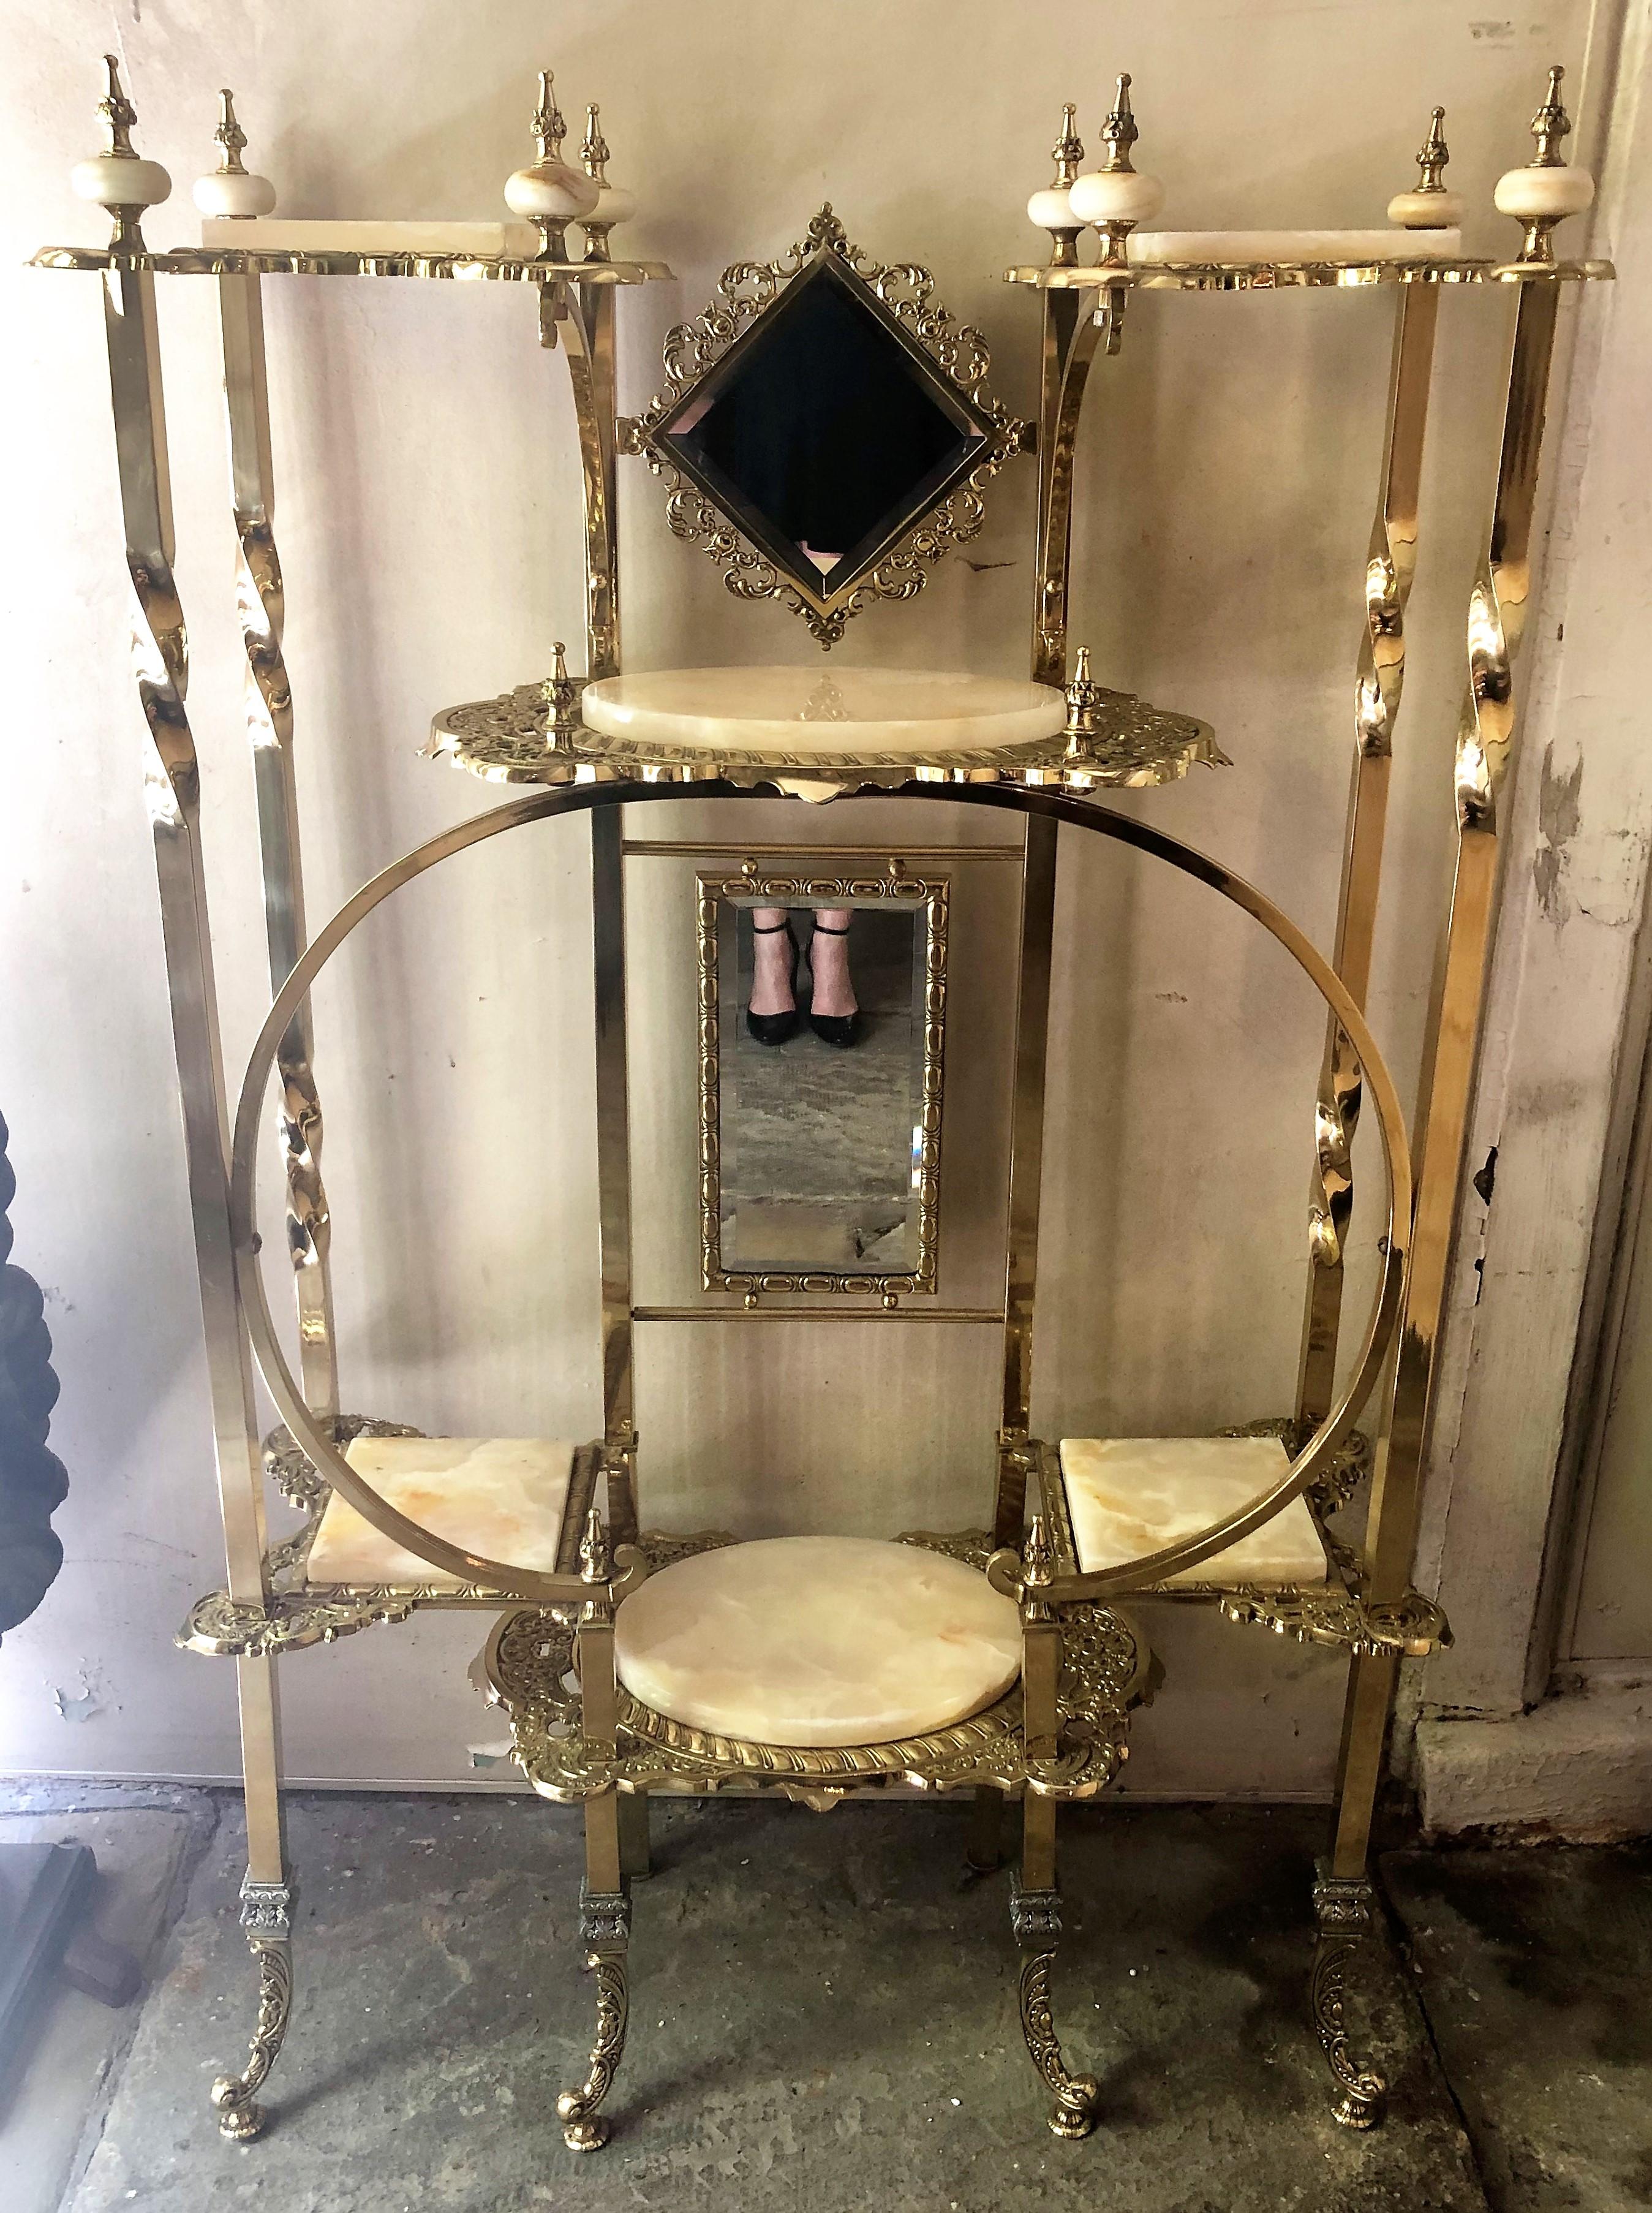 Antique English high Victorian brass and onyx étagère with beveled mirrors, circa 1890-1910.
Beautiful etagere in near pristine condition with original onyx and beveled mirrors. The hand-wrought brass has intricate piercings, twists and repousse